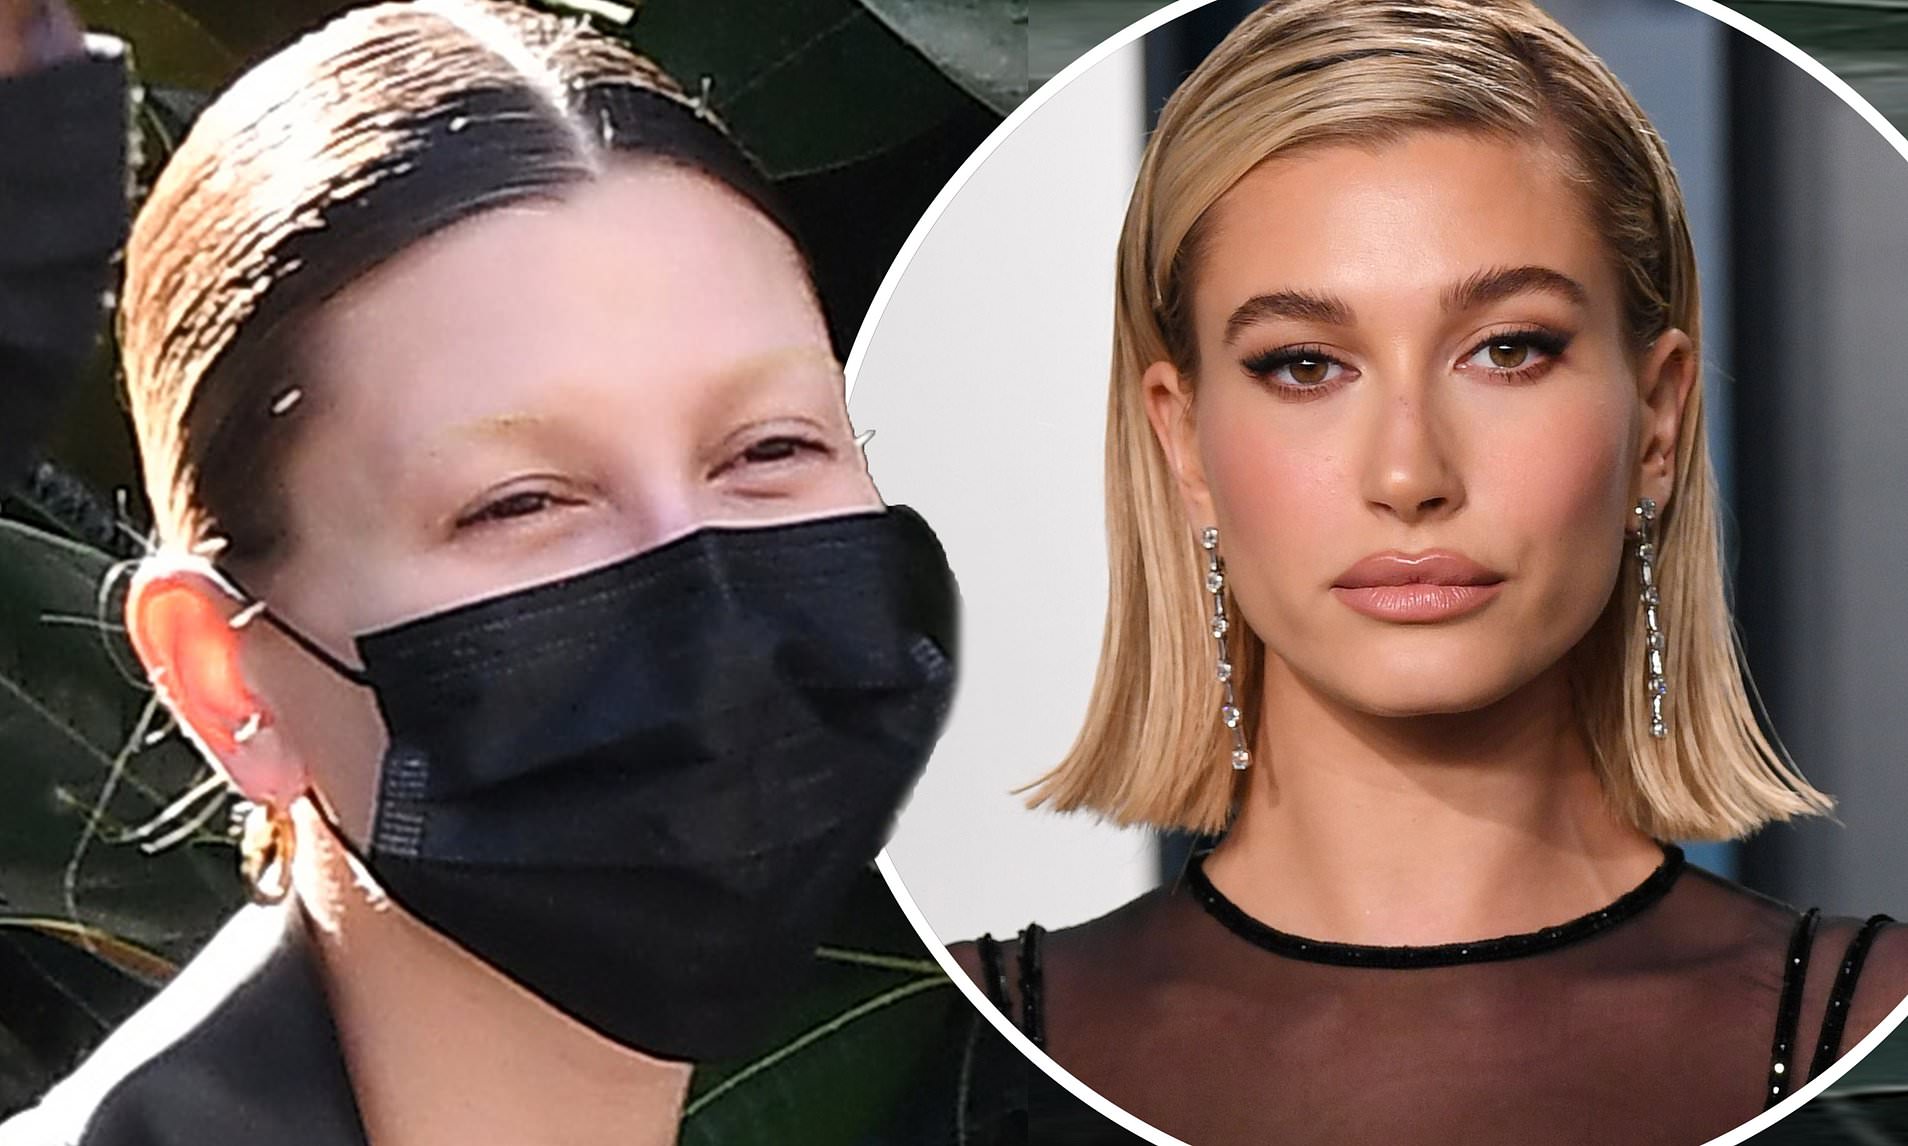 Hailey Bieber Wiki, Bio, Age, Net Worth, and Other Facts